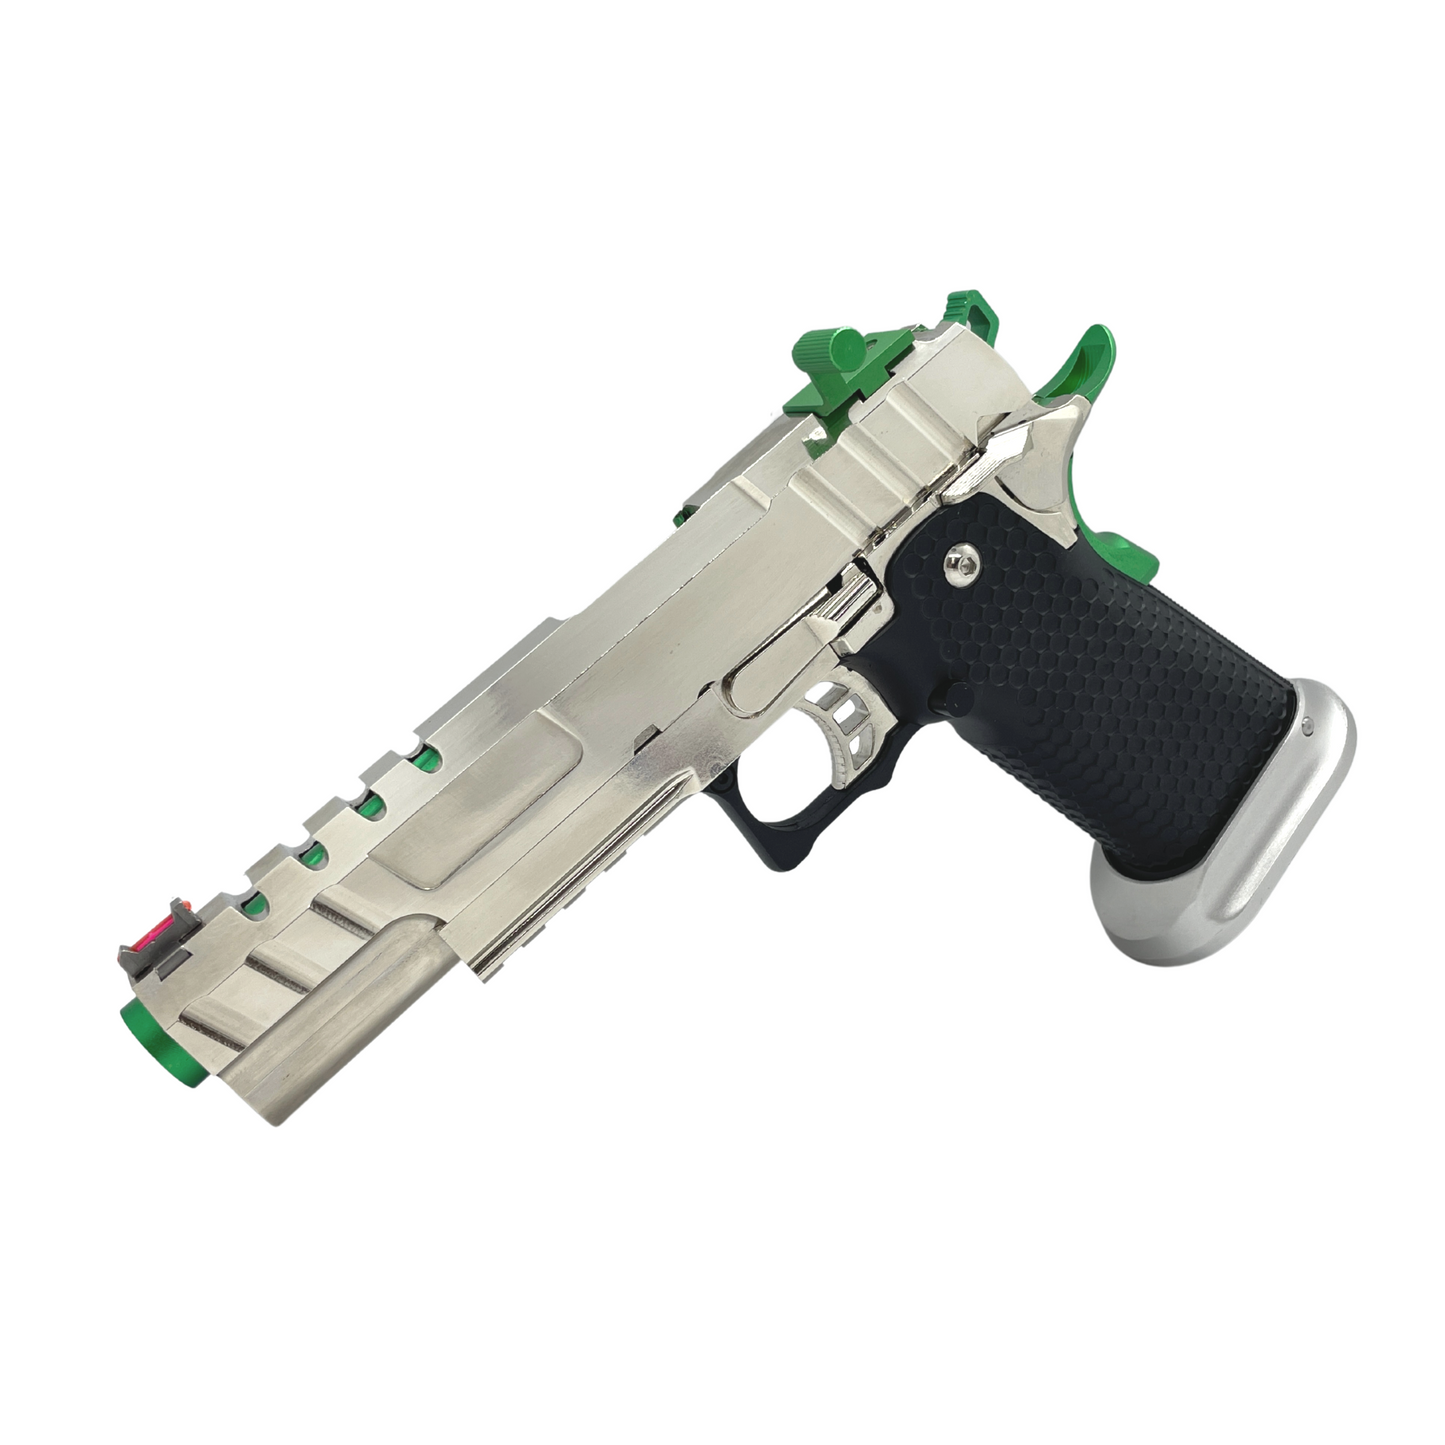 "Chrome to the Dome" 5.1 Competition Hi-Capa Pistol - Gel Blaster